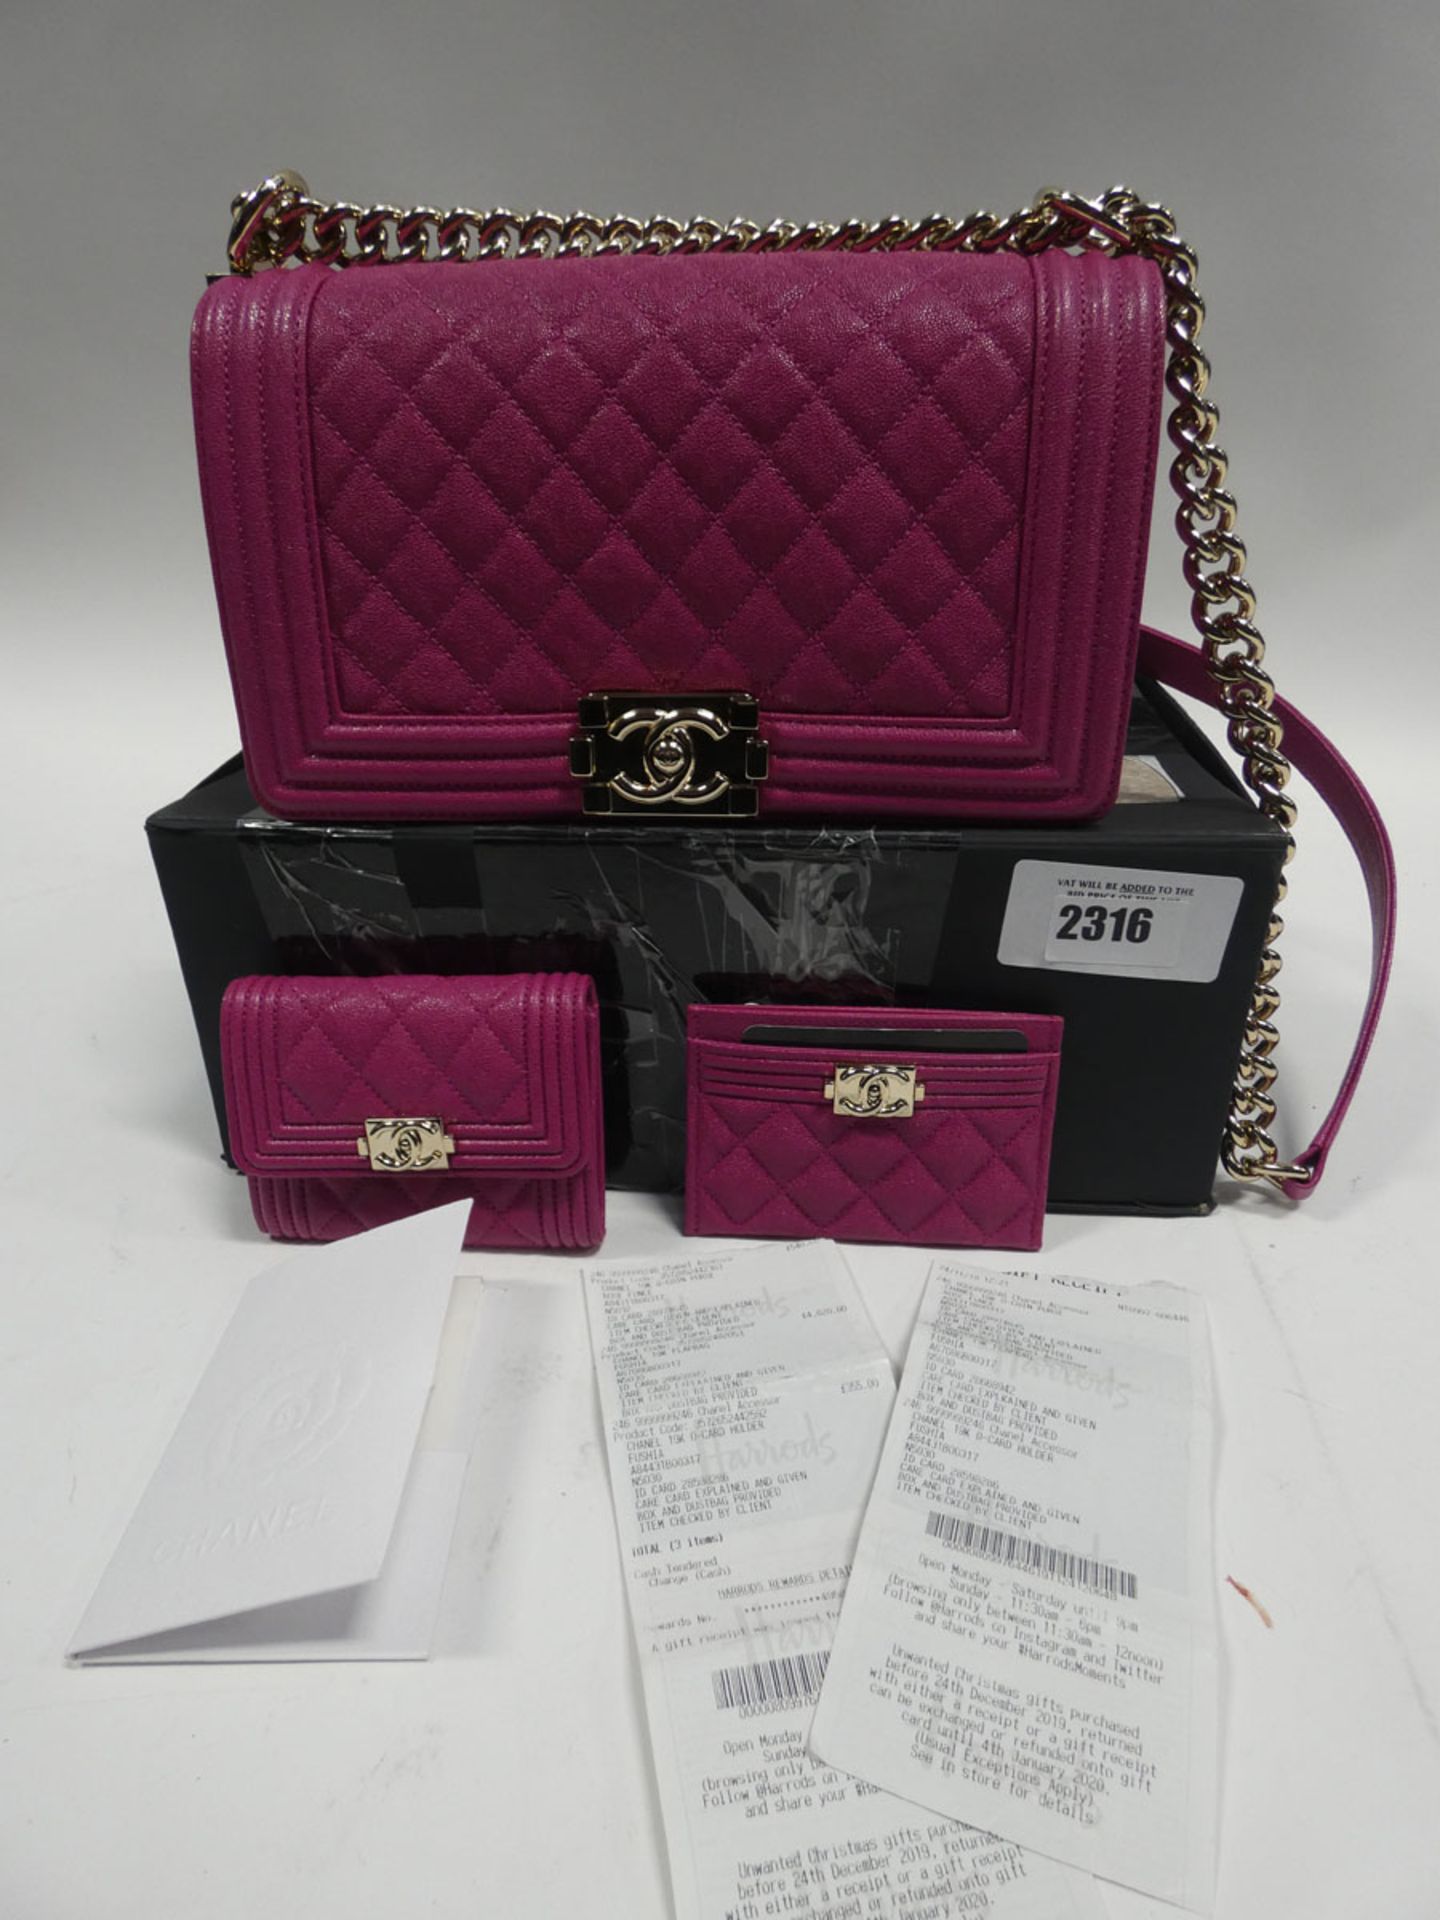 Chanel 19K Flap Bag, Chanel coin purse and Chanel card holder in pink with box, documents and